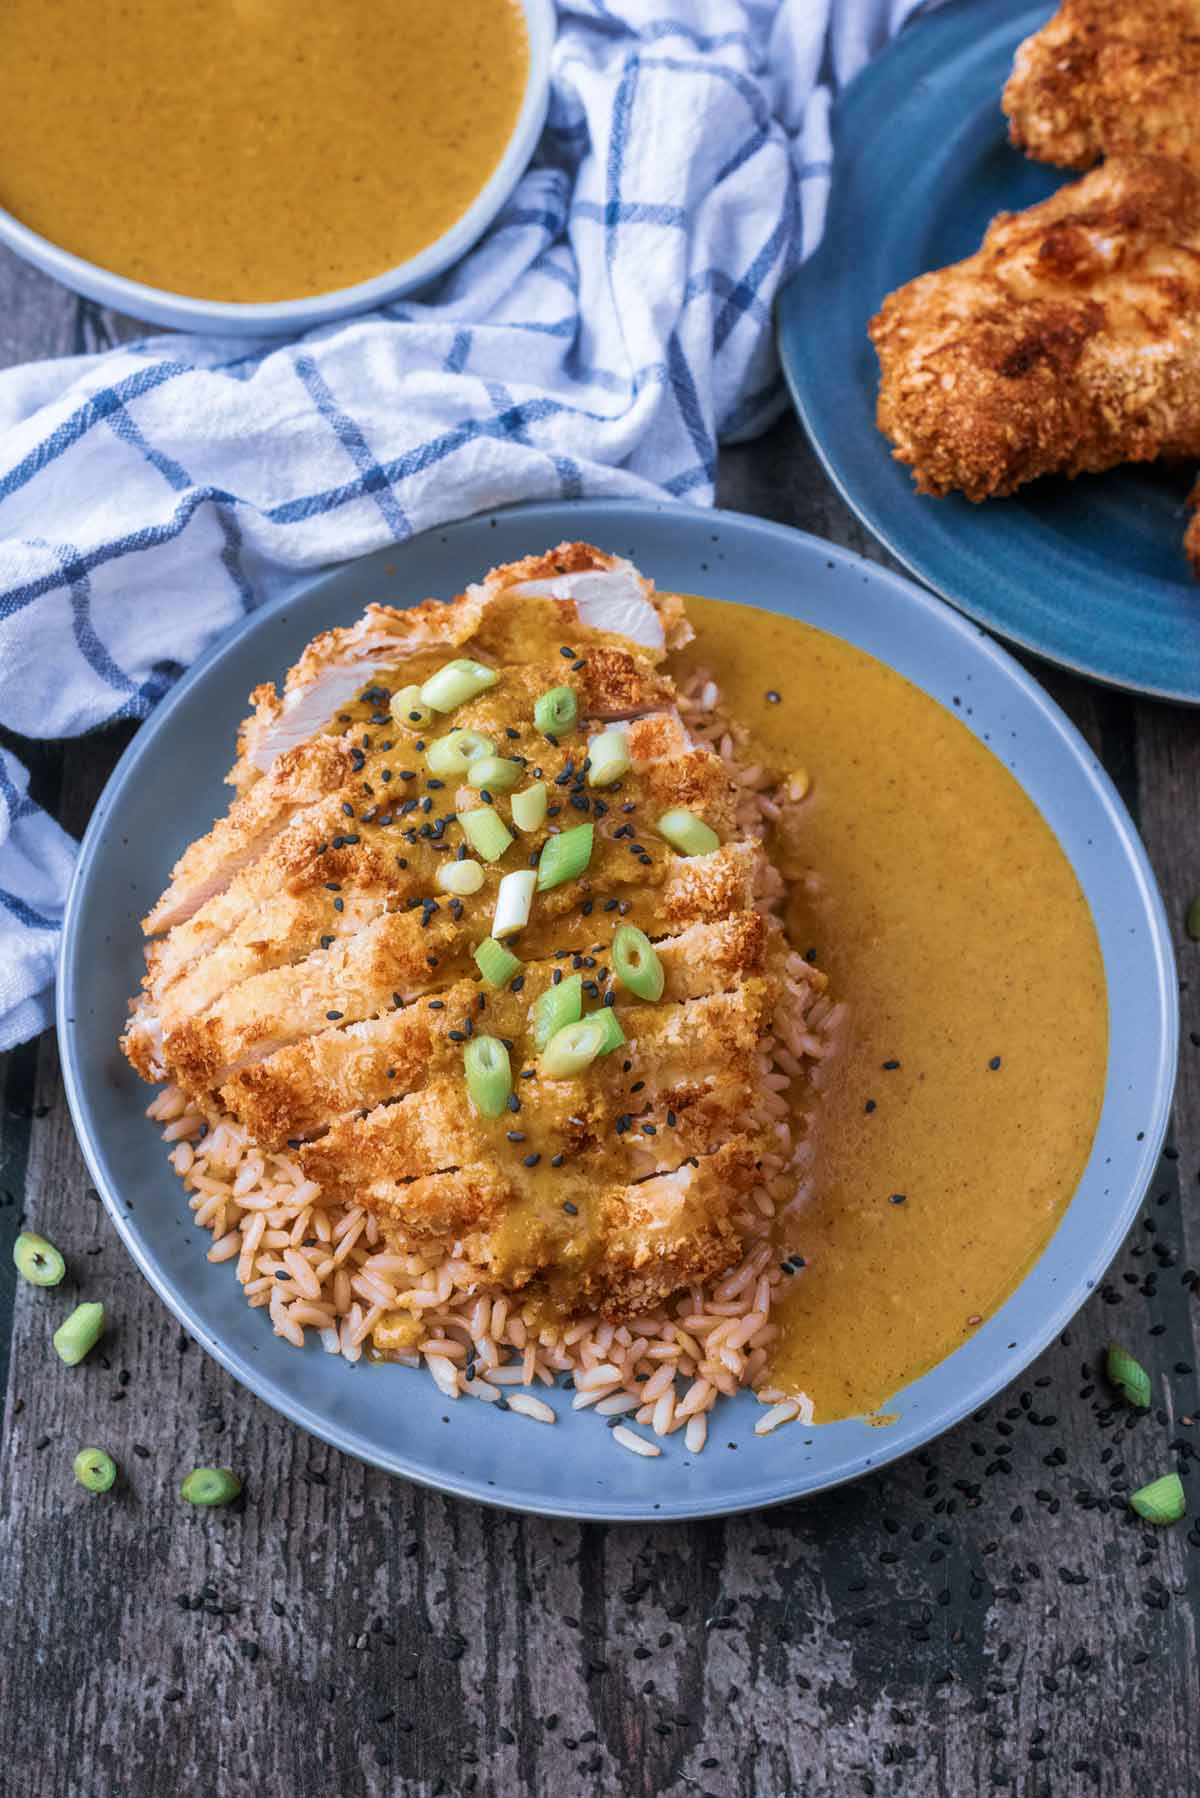 Chicken katsu in a bowl with rice, in front of more chicken.